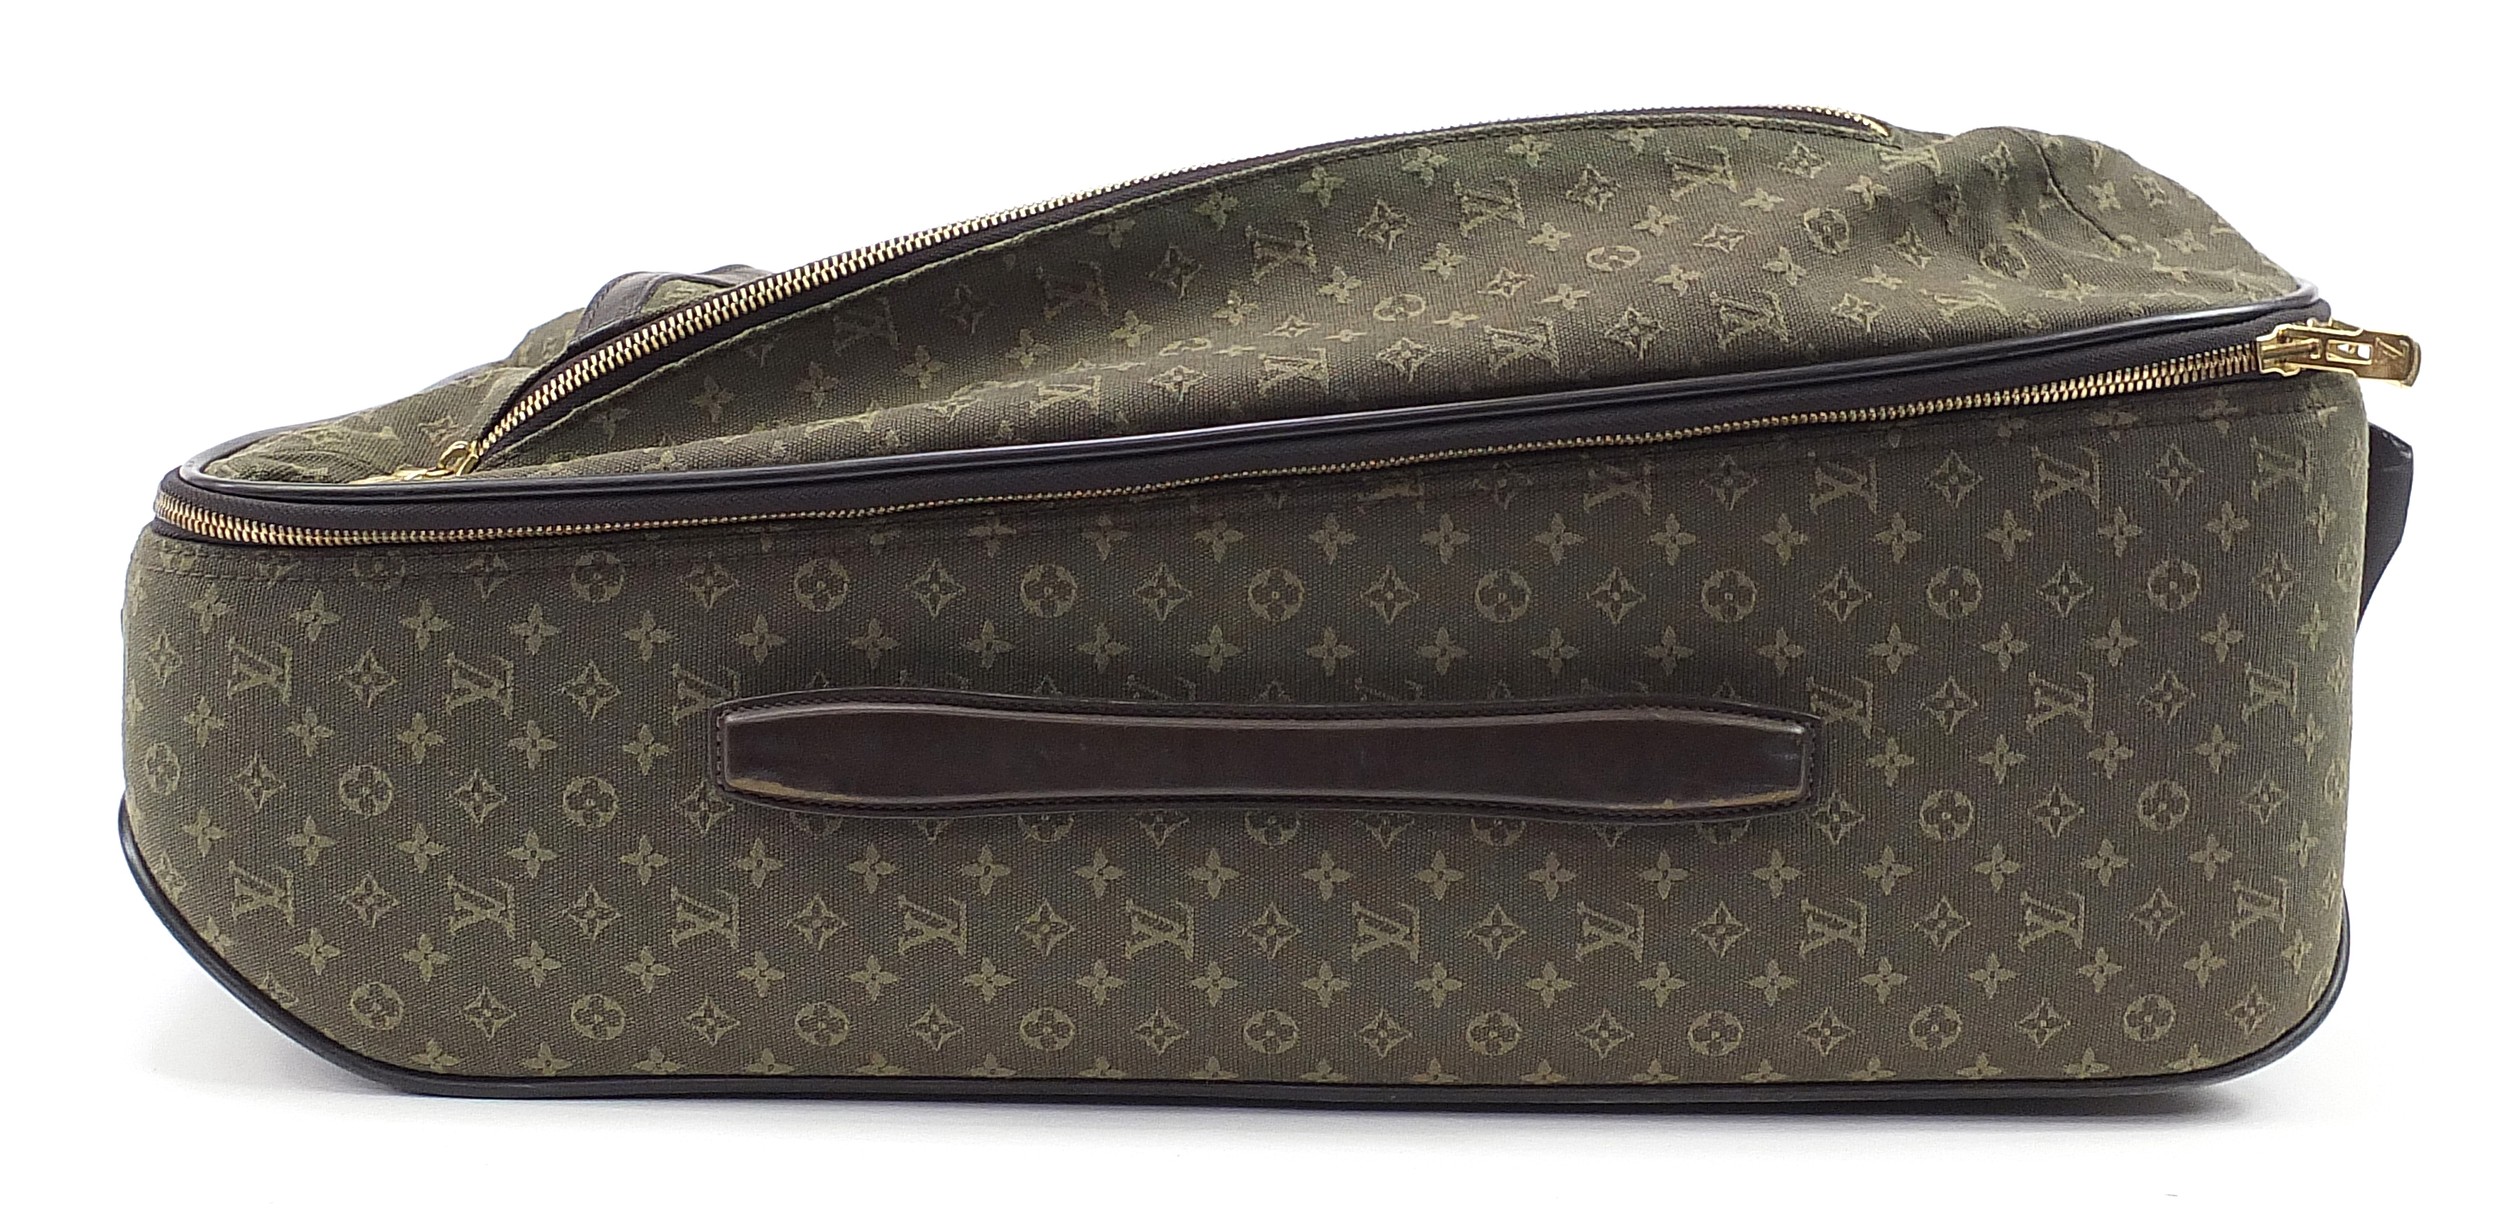 Louis Vuitton Pegase green monogrammed canvas trolley travel suitcase, serial number SP0062, 57cm - Image 5 of 11